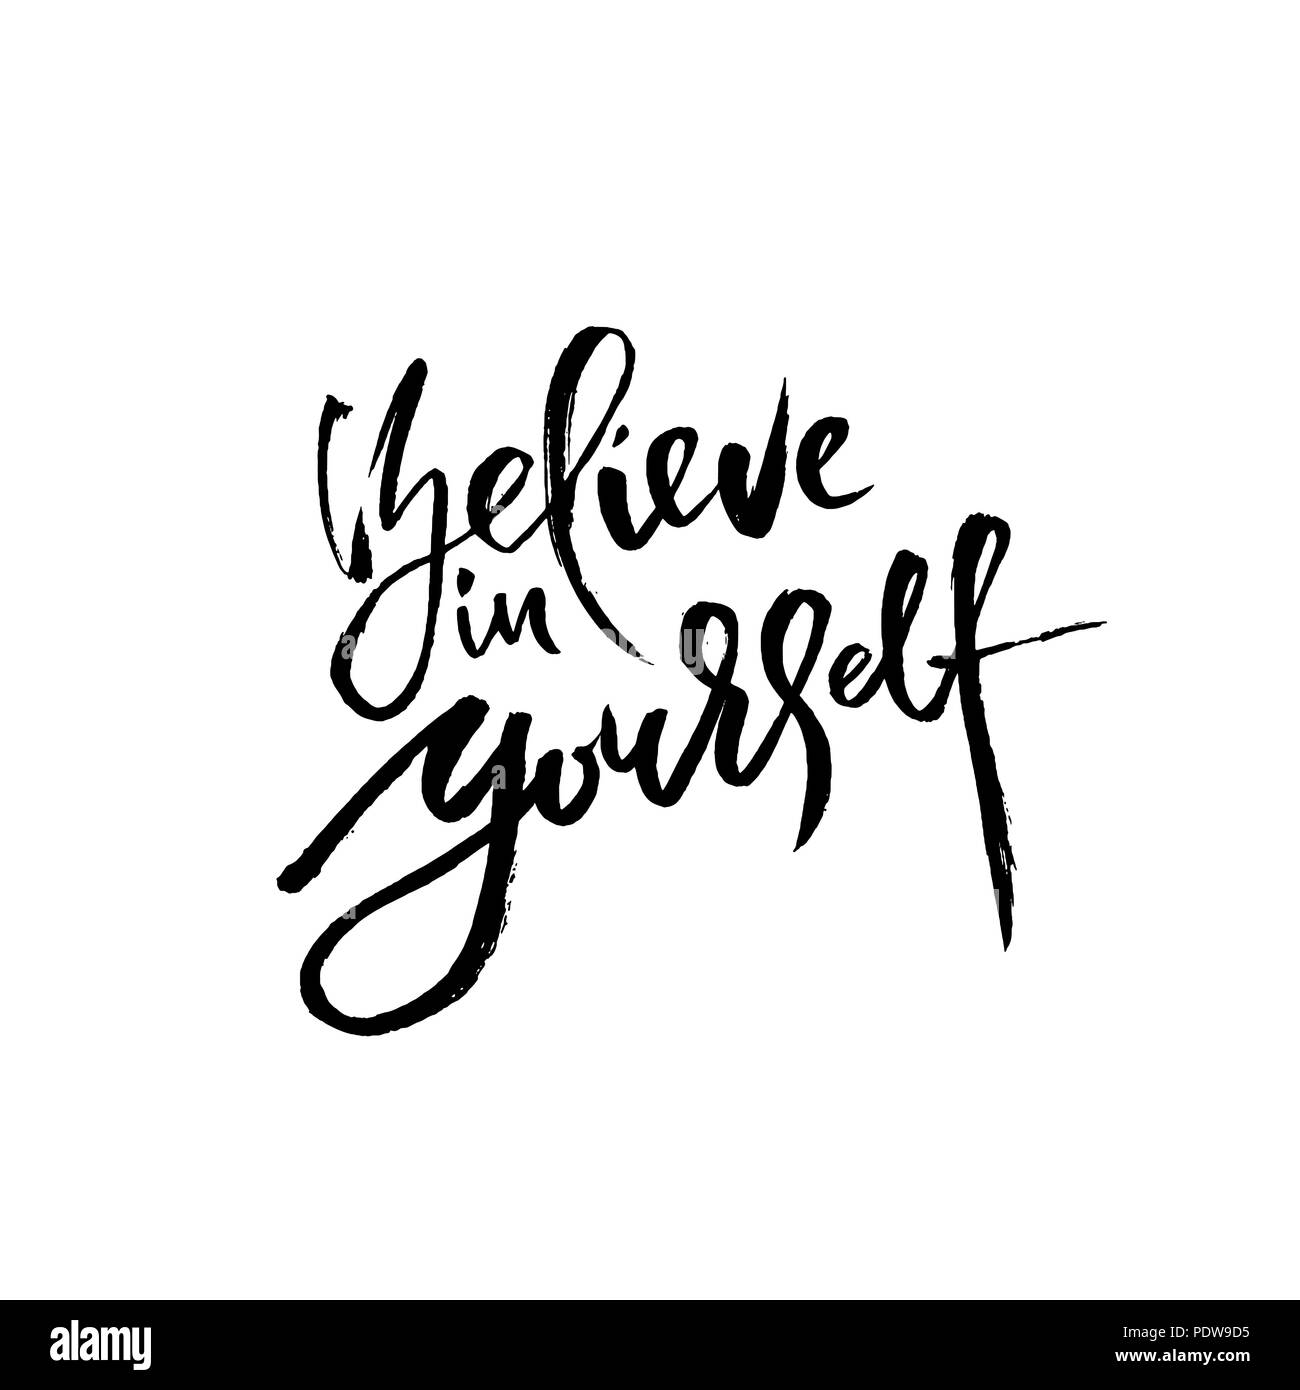 Believe in yourself. Hand drawn dry brush lettering. Ink illustration ...